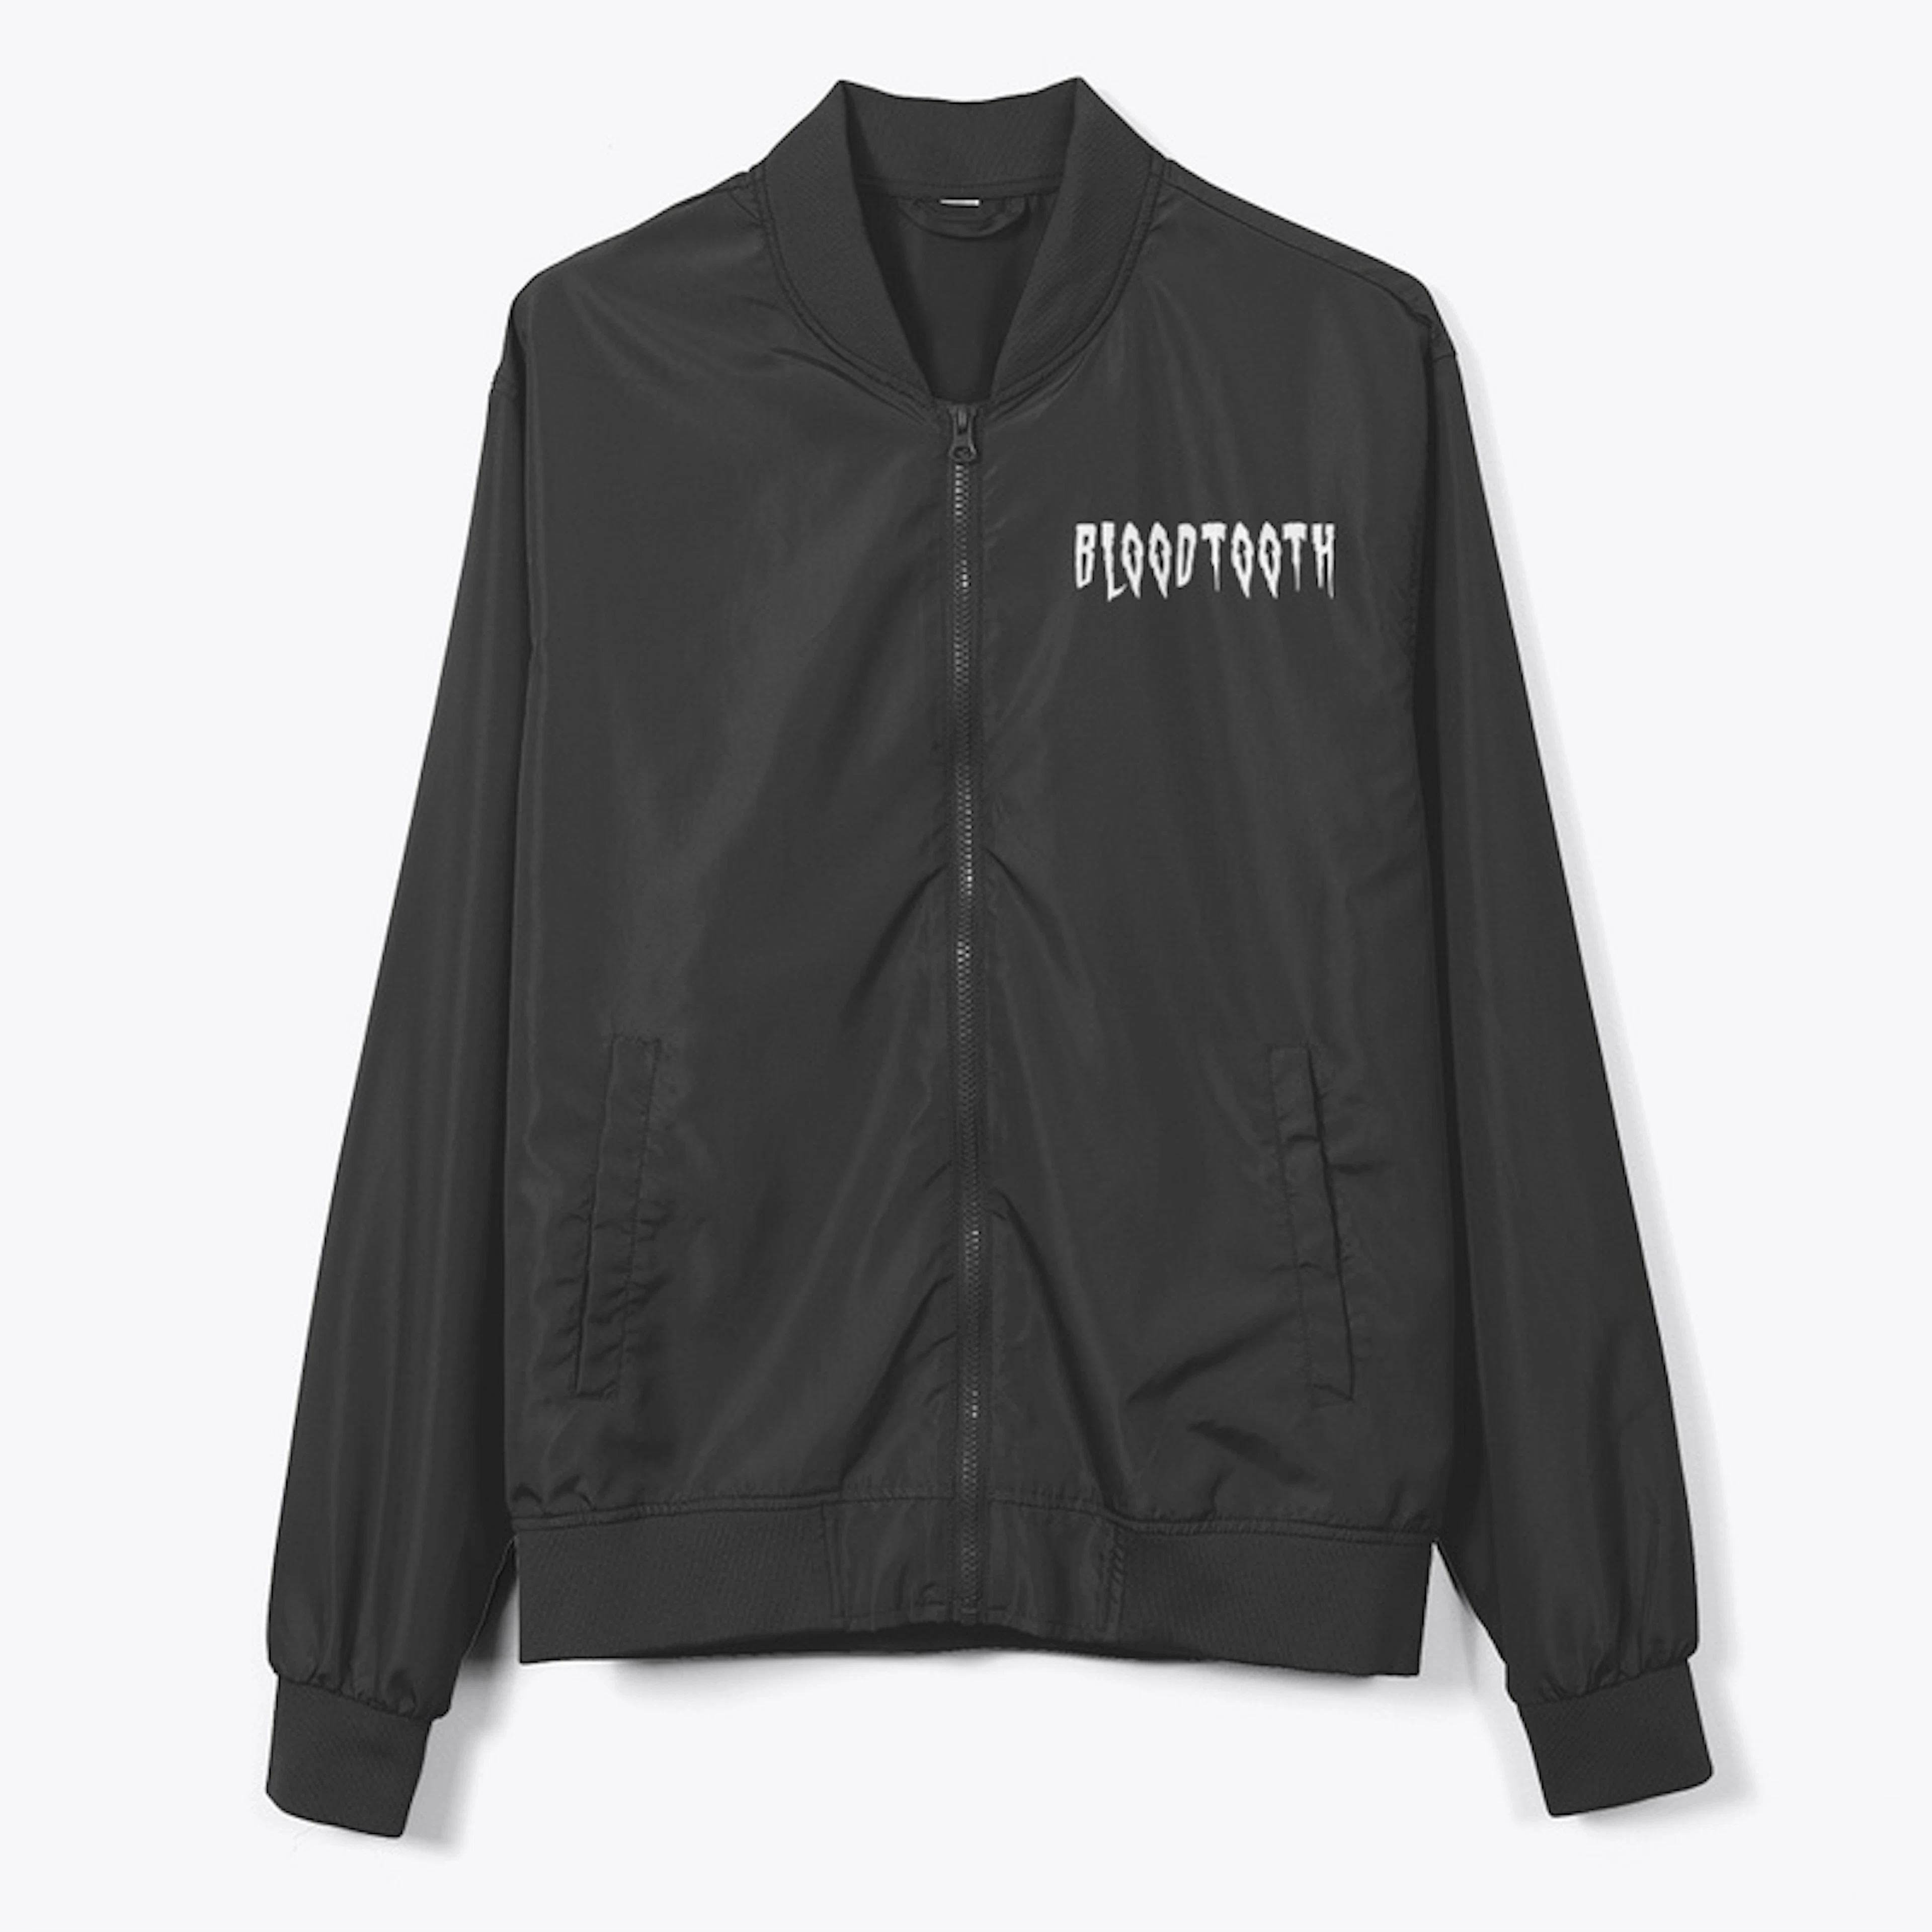 Limited edition Bloodtooth Bomber